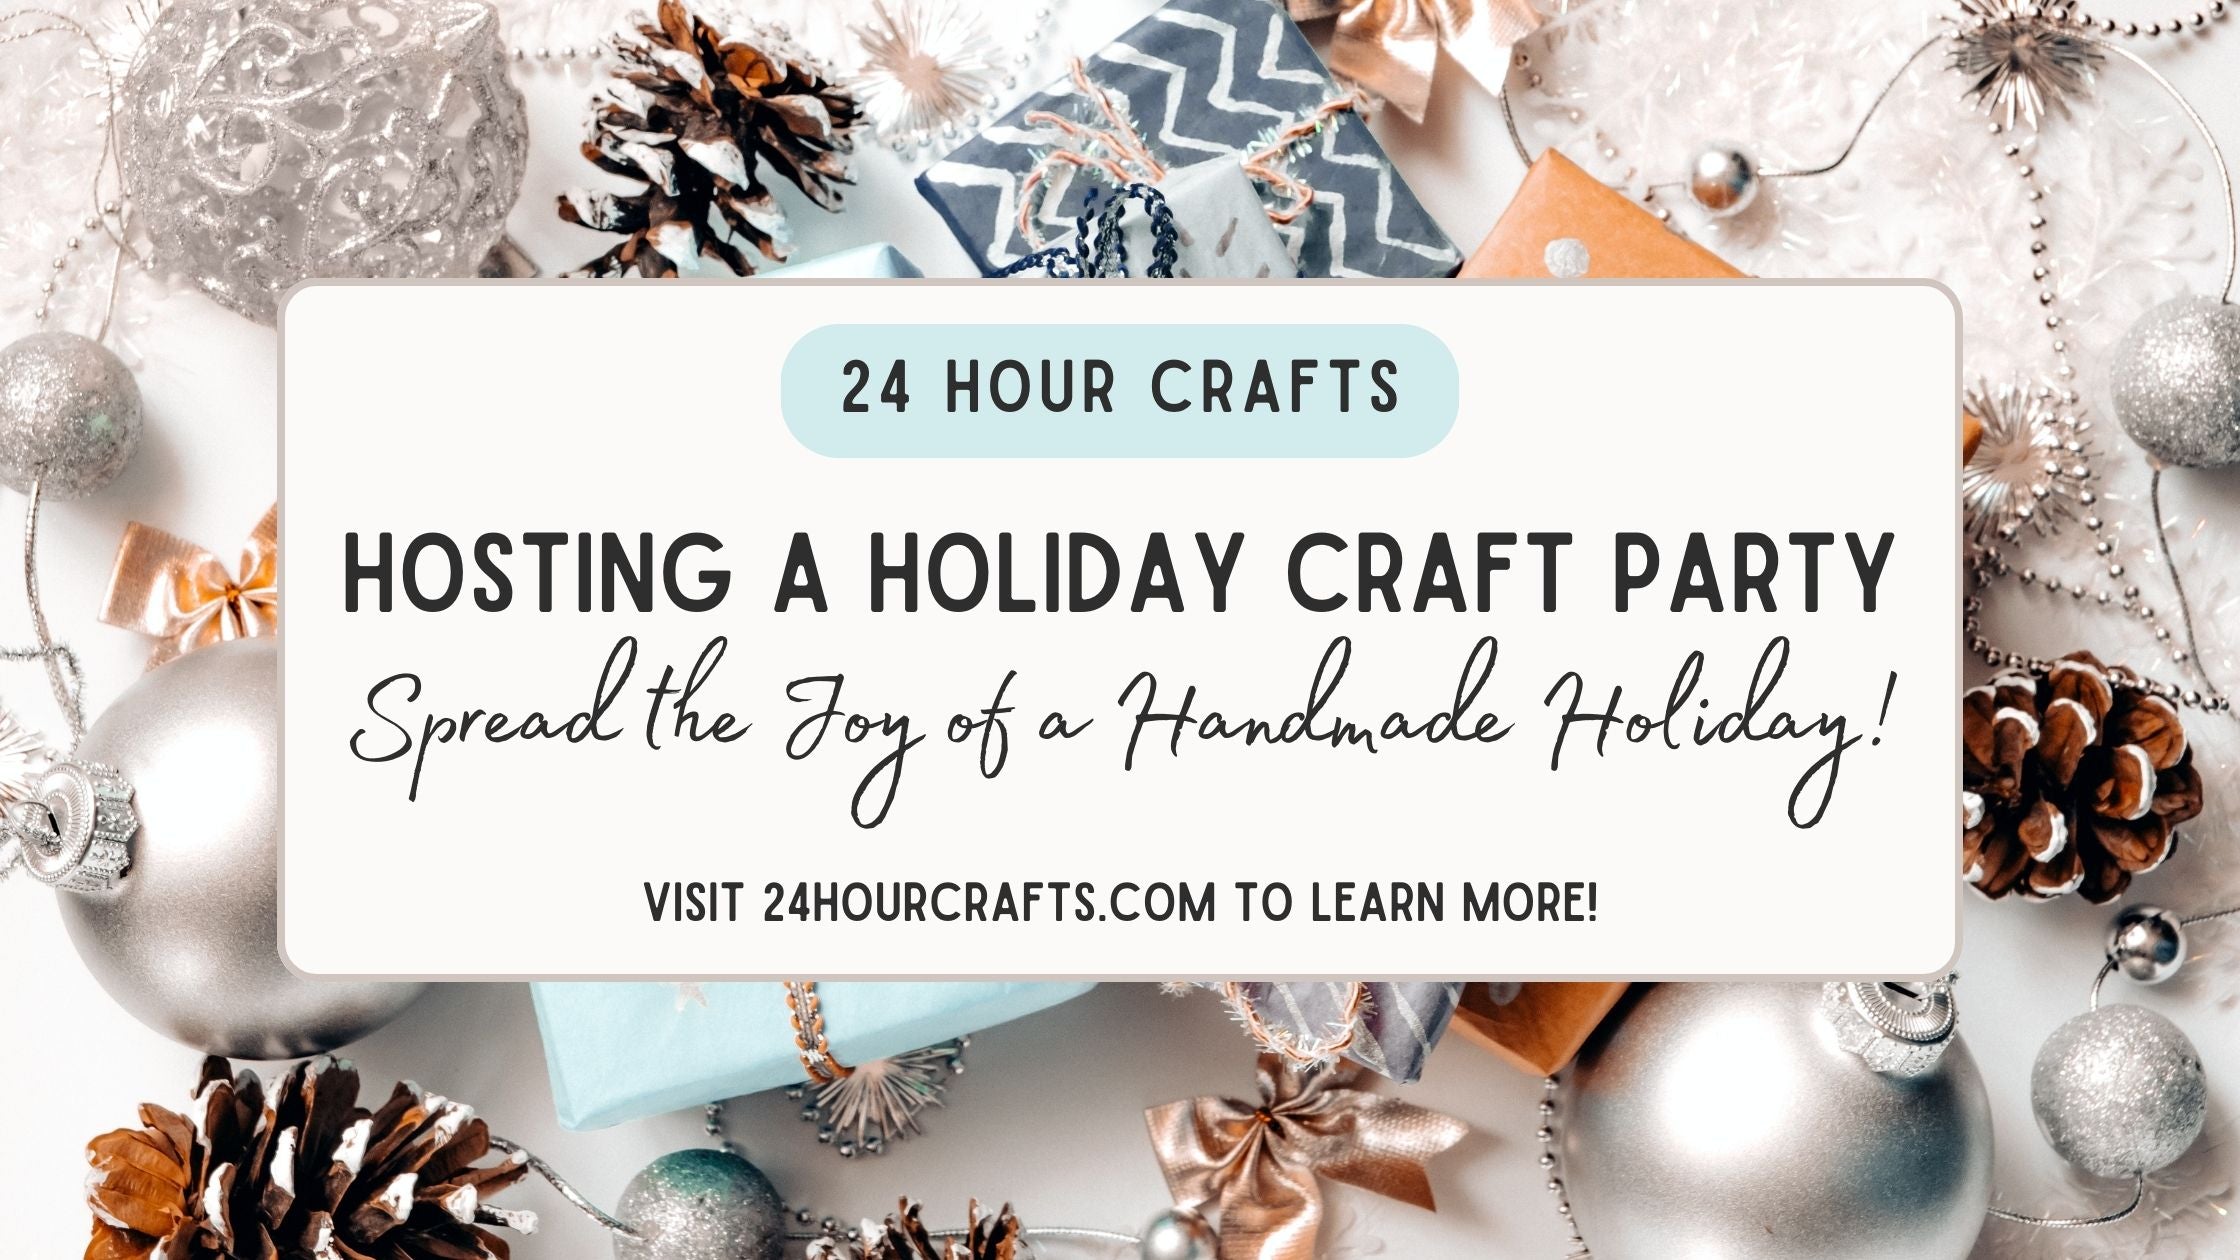 Hosting a Holiday Craft Party : Spread the Joy of a Handmade Holiday!